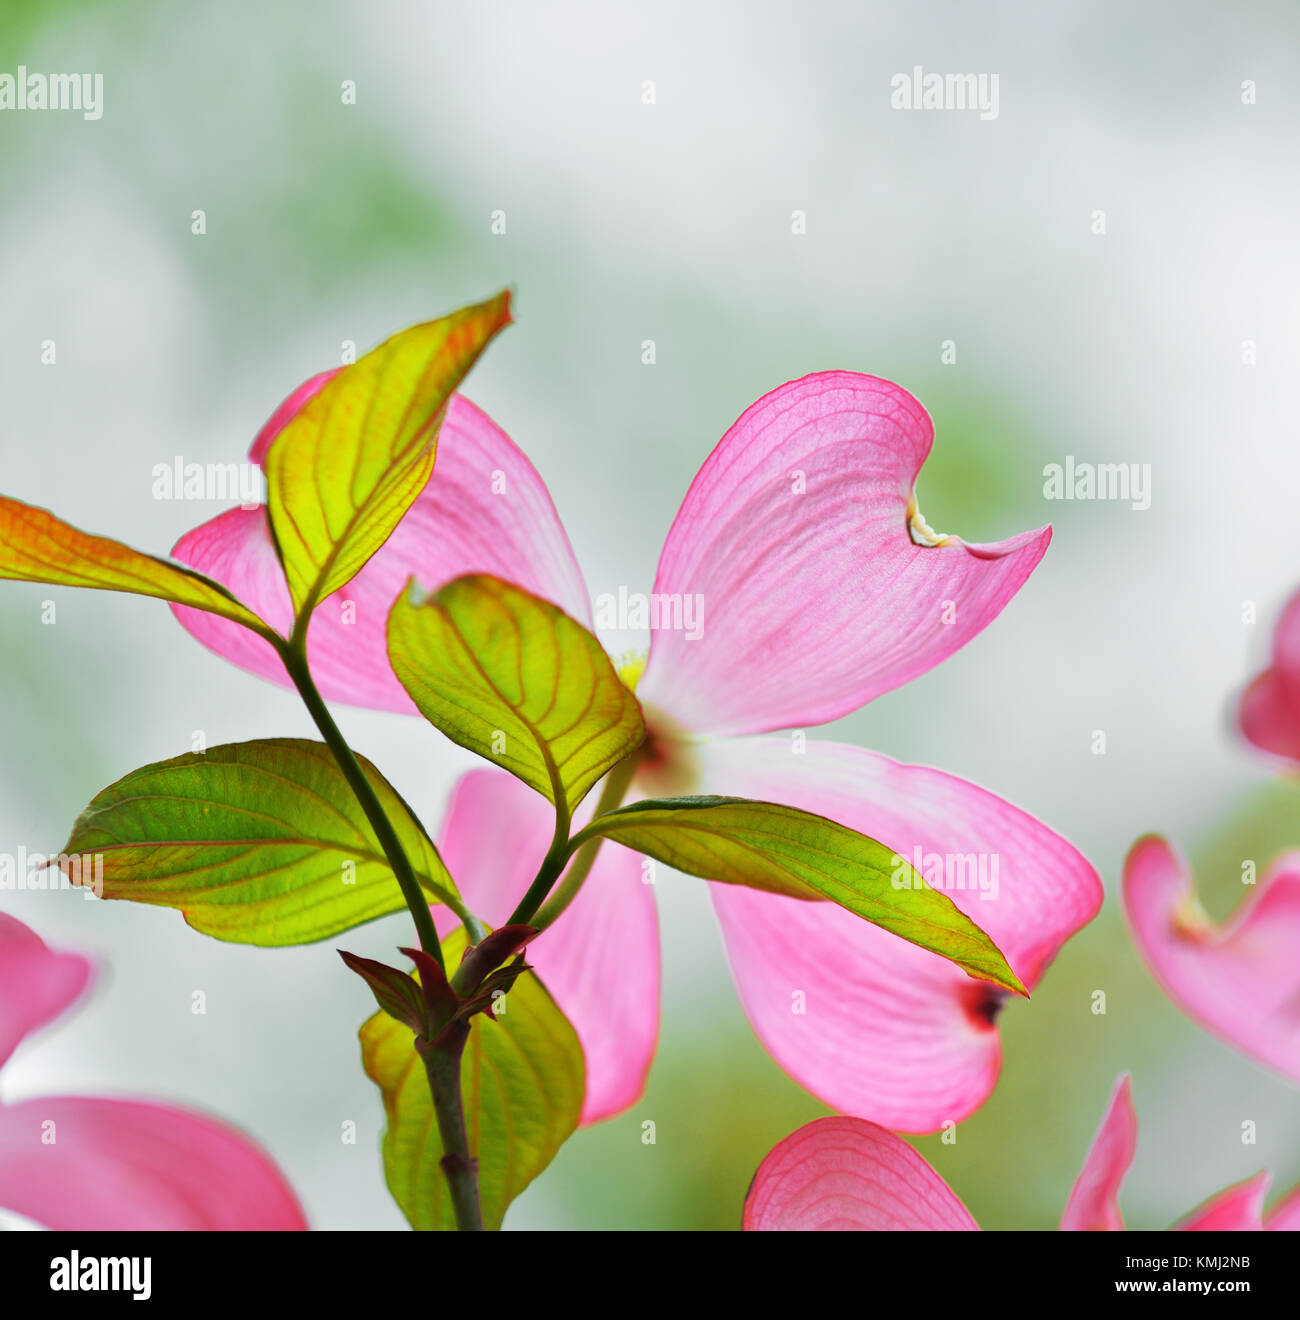 Flowering dogwood detail. Pink flower and new leaves isolated on creamy, soft focus background Stock Photo